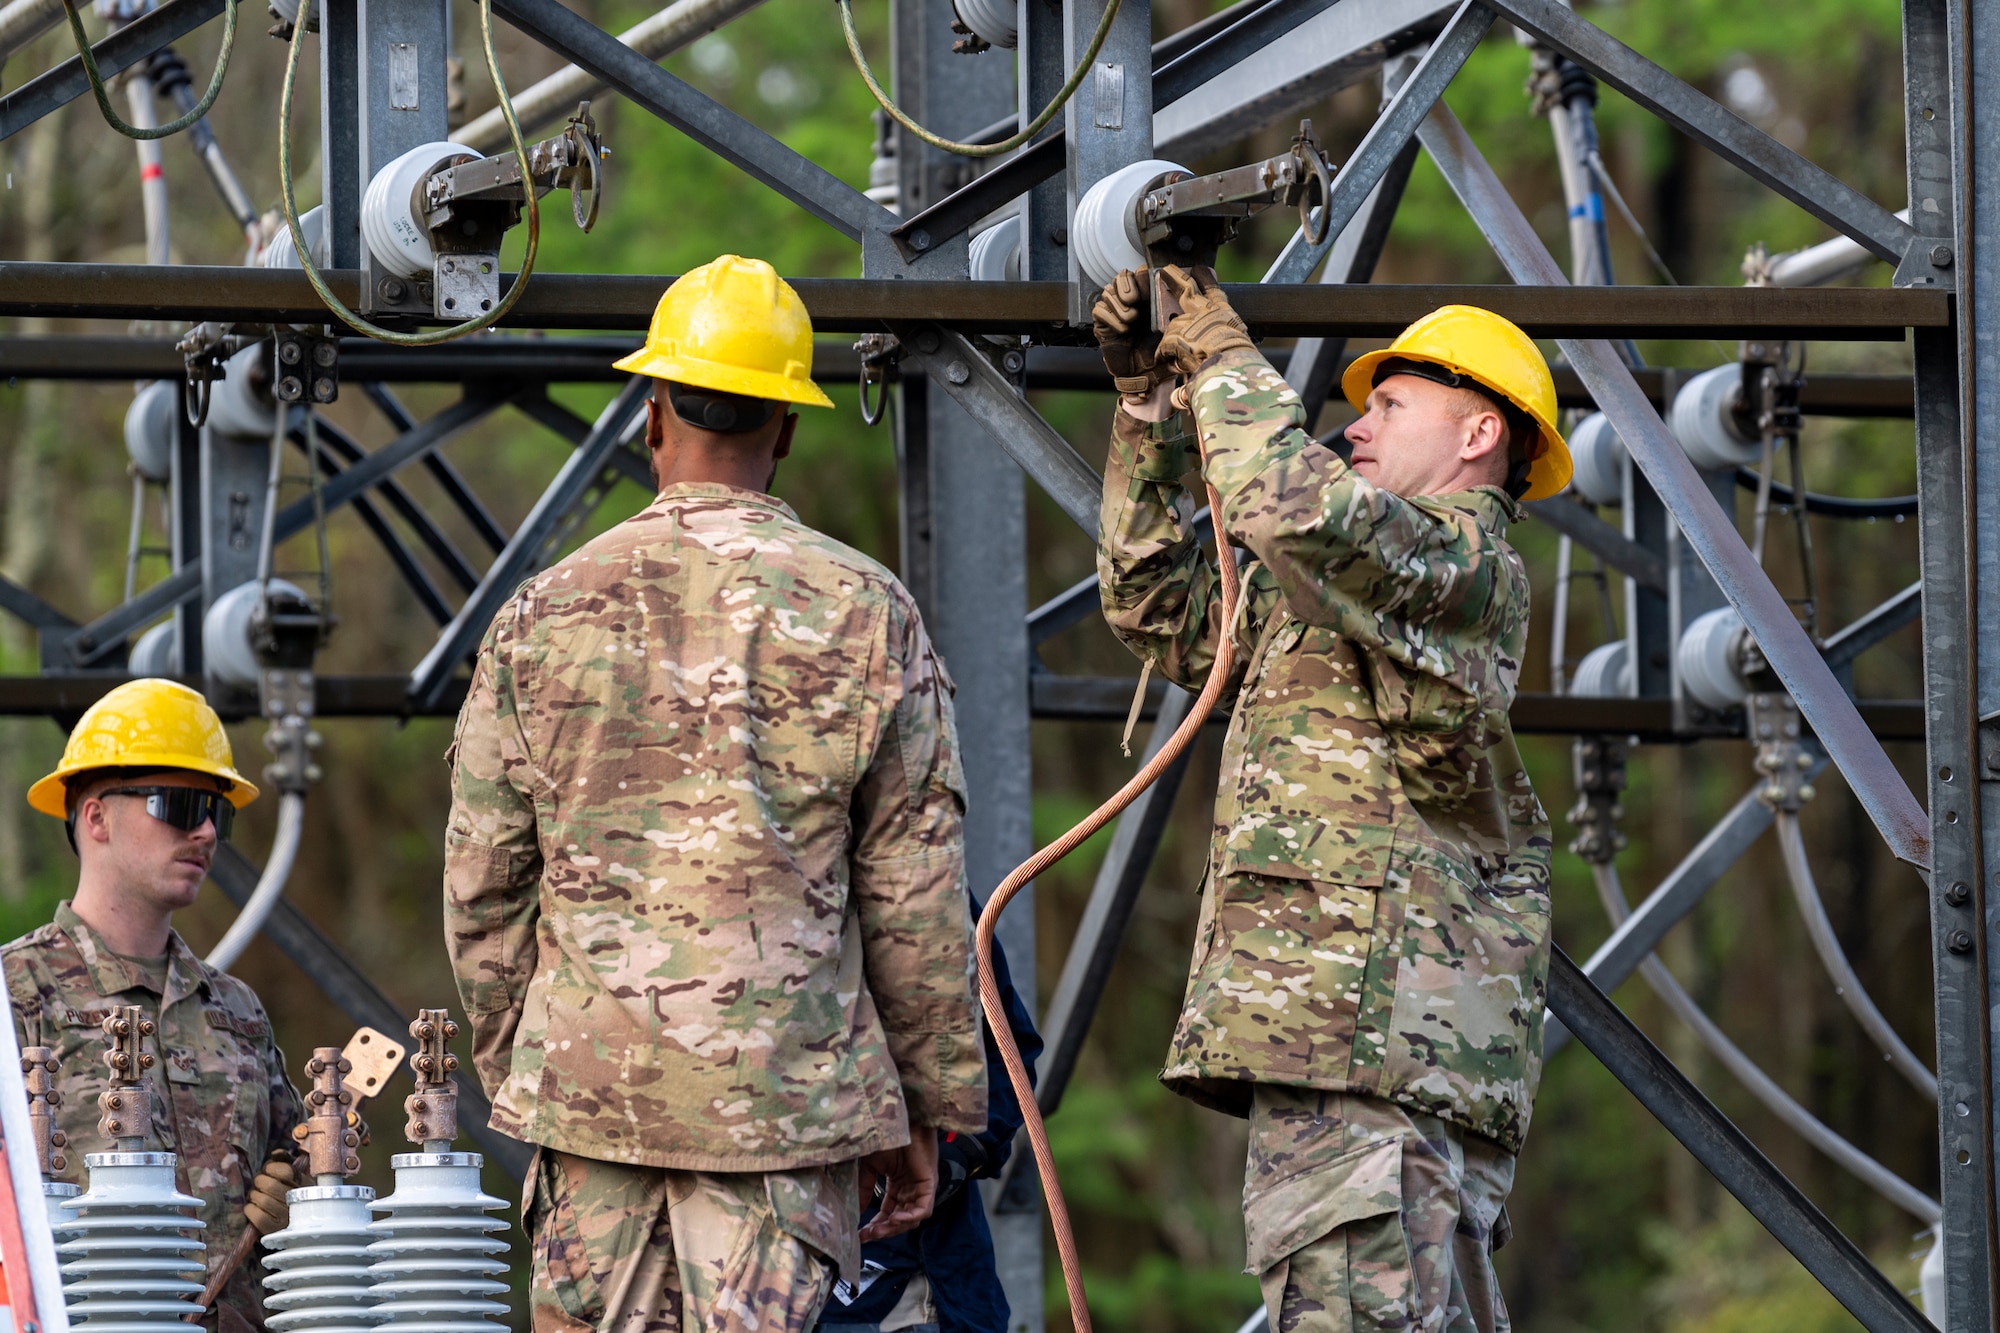 Photo of an Airman replacing a breaker during a power outage.